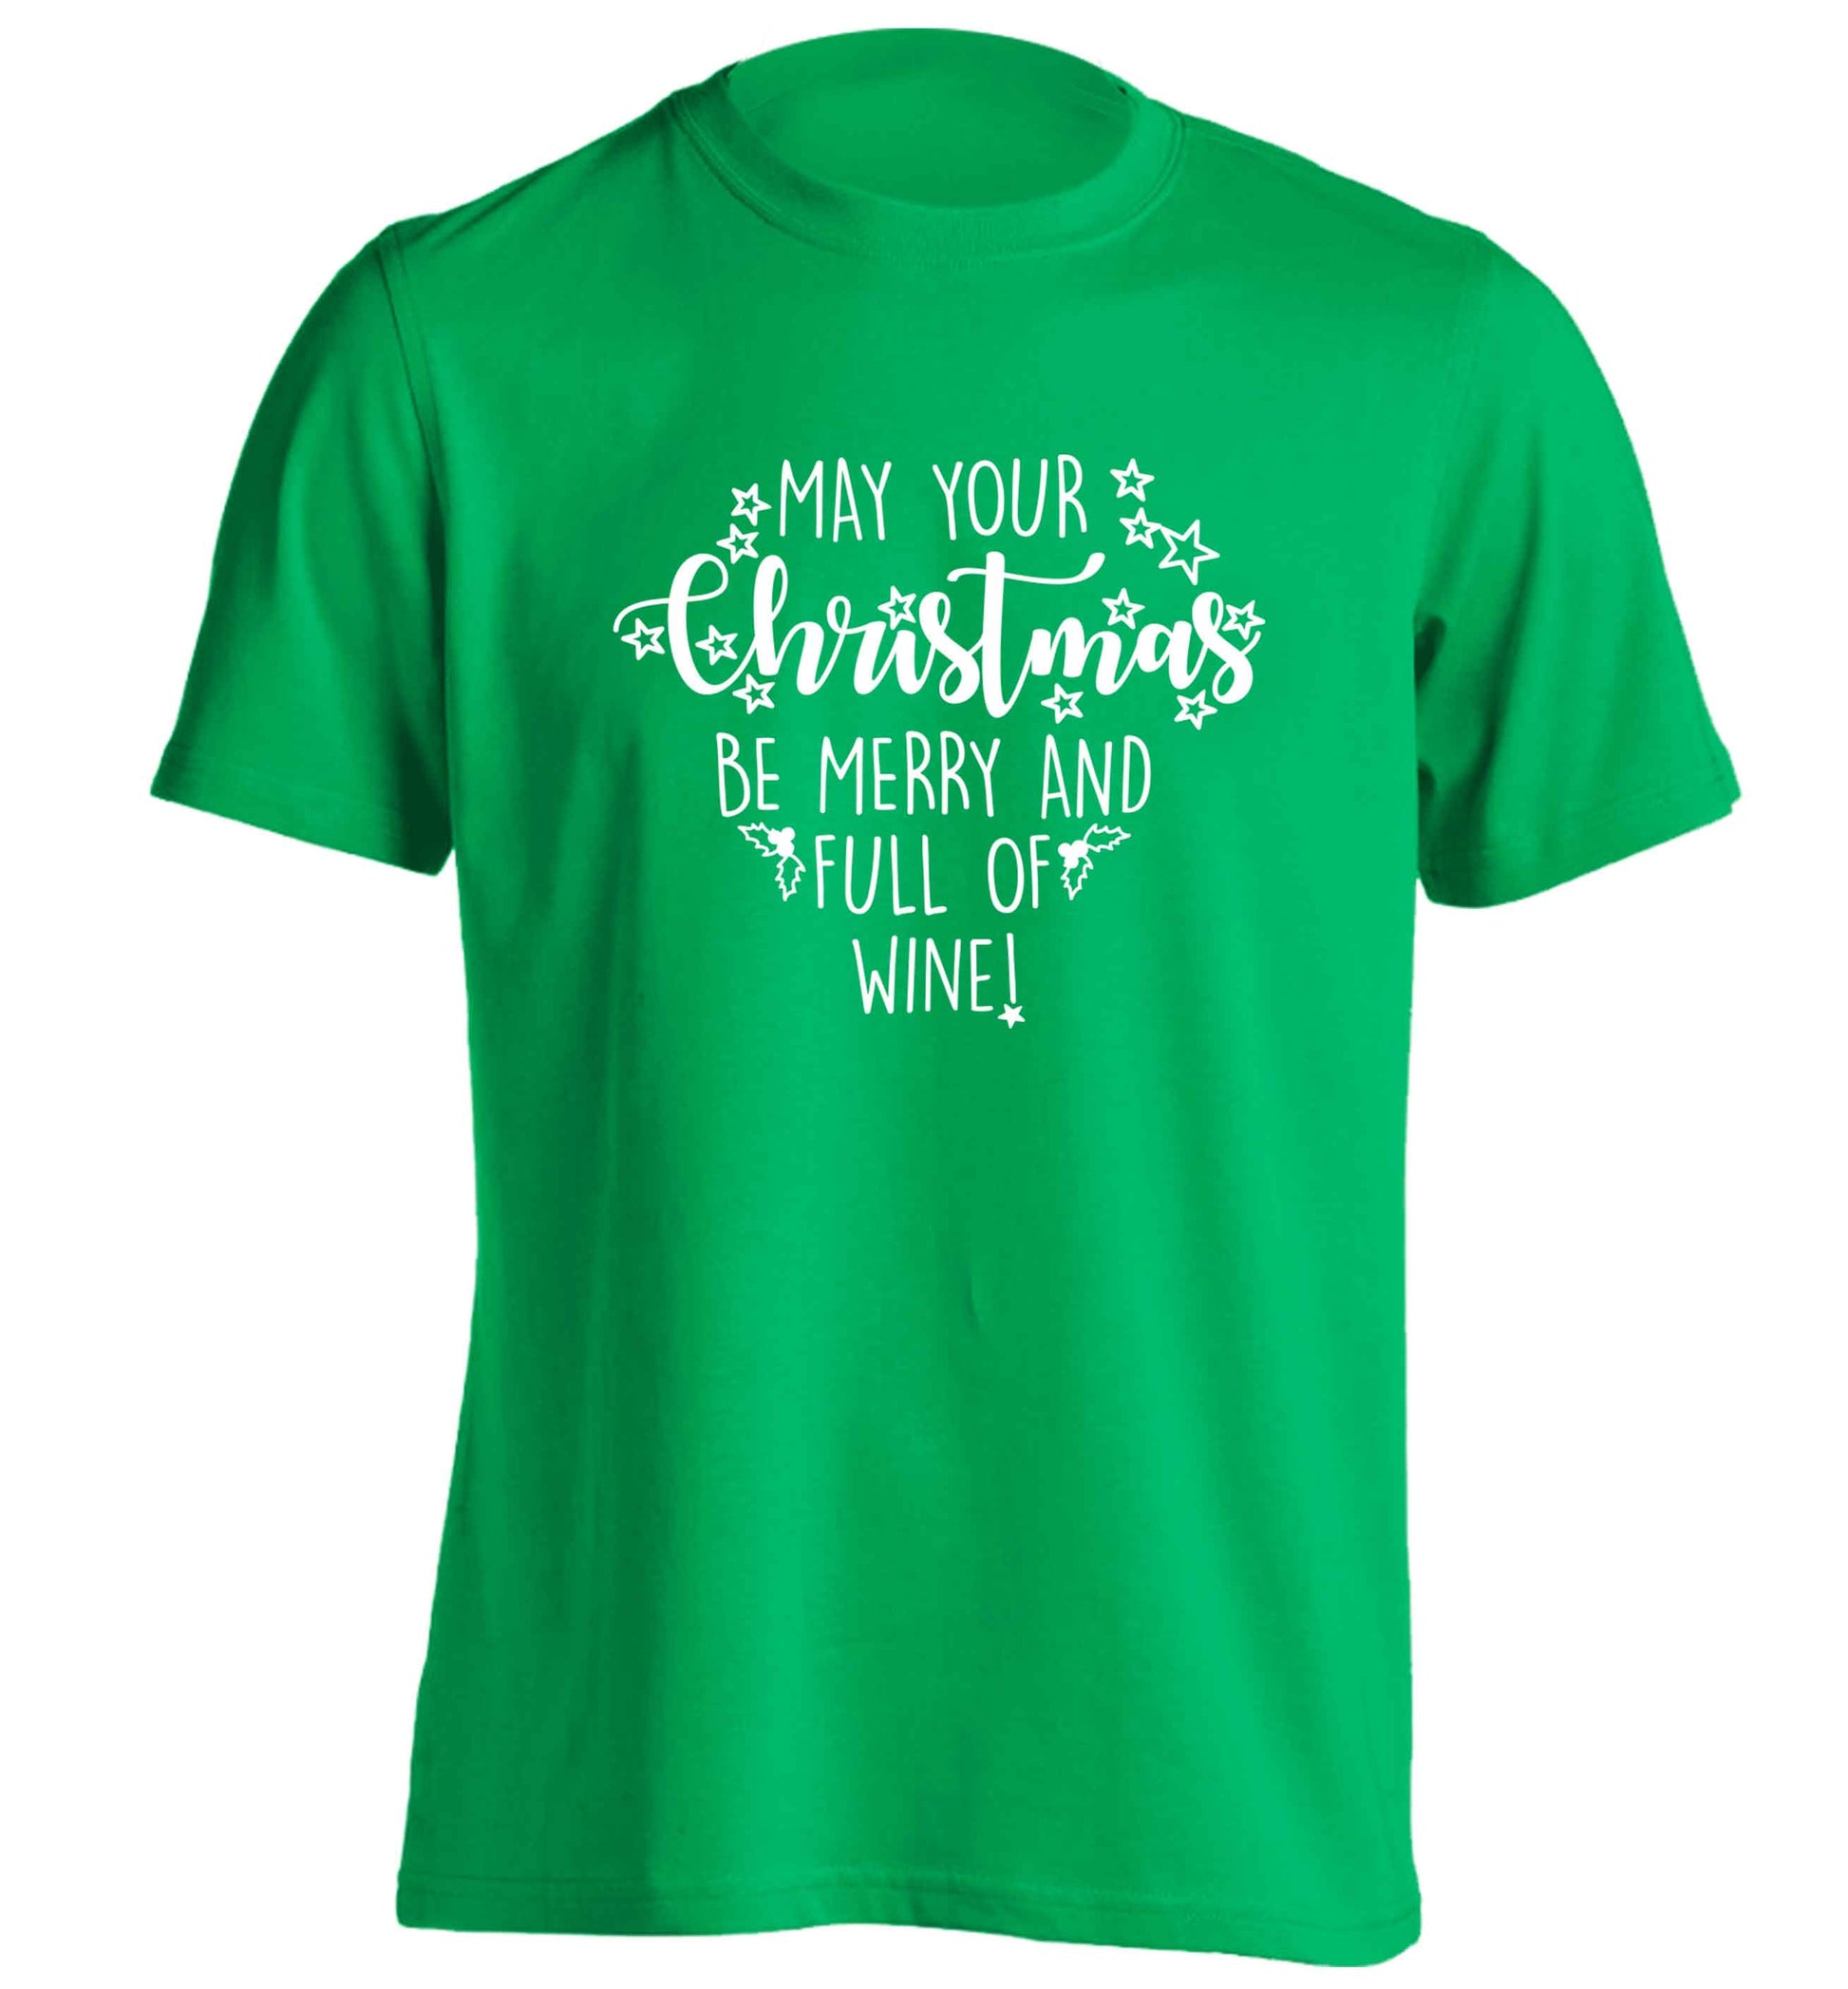 May your Christmas be merry and full of wine adults unisex green Tshirt 2XL